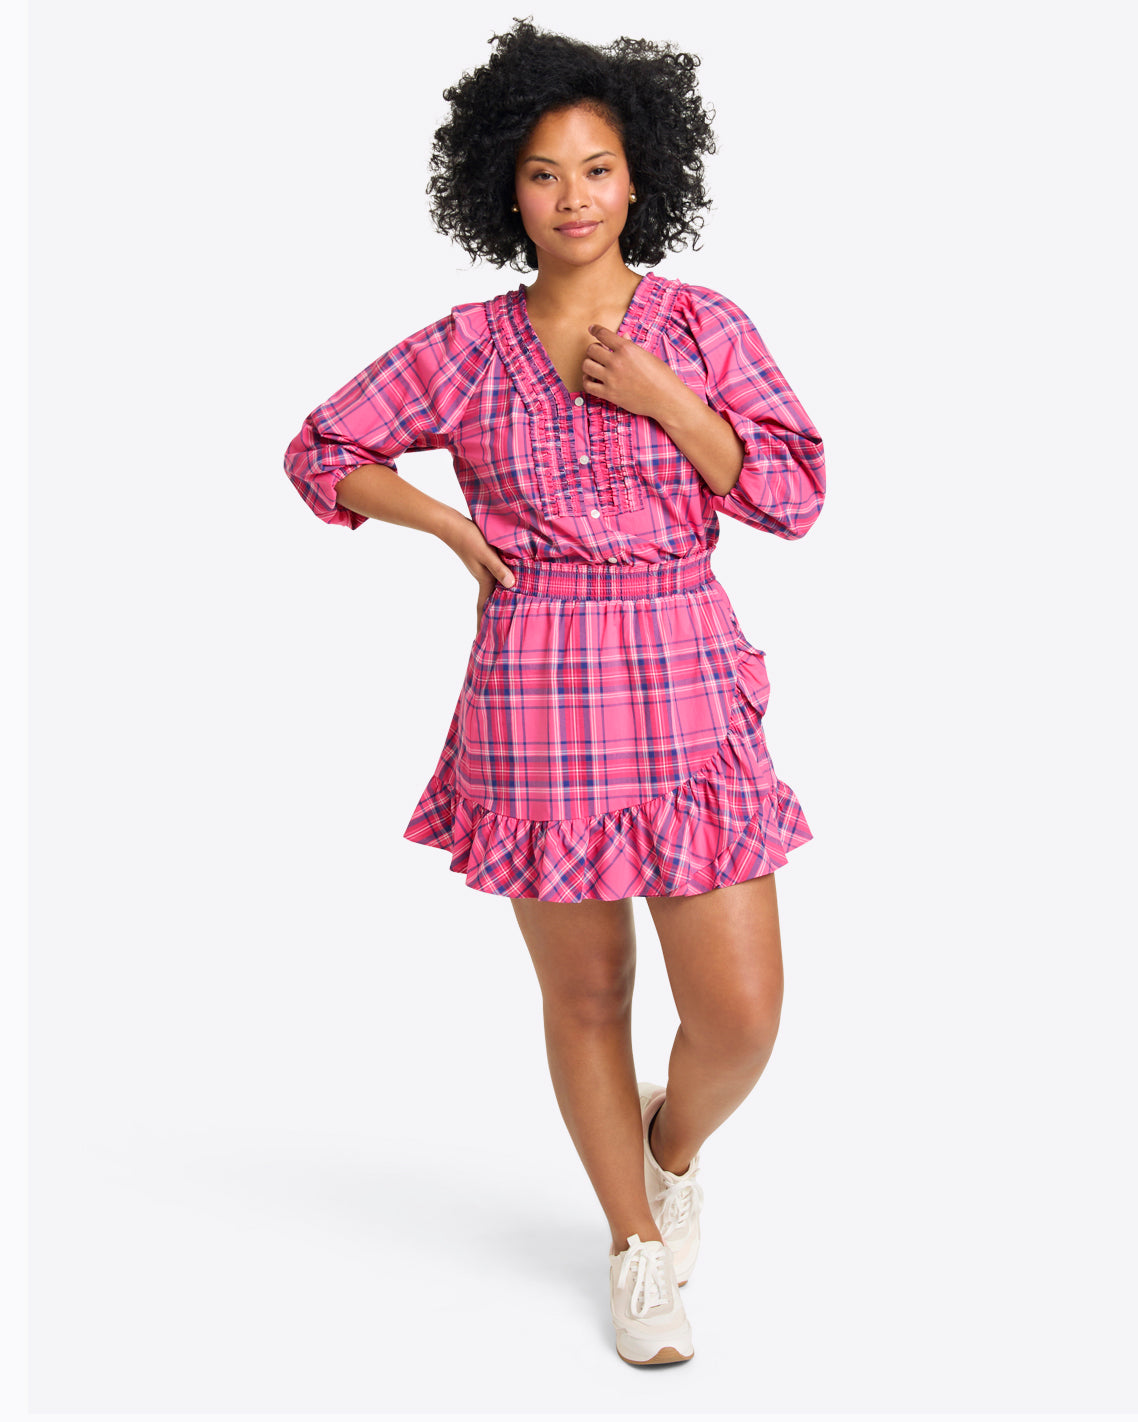 Ruffle Wrap Skirt in Pink Angie Plaid